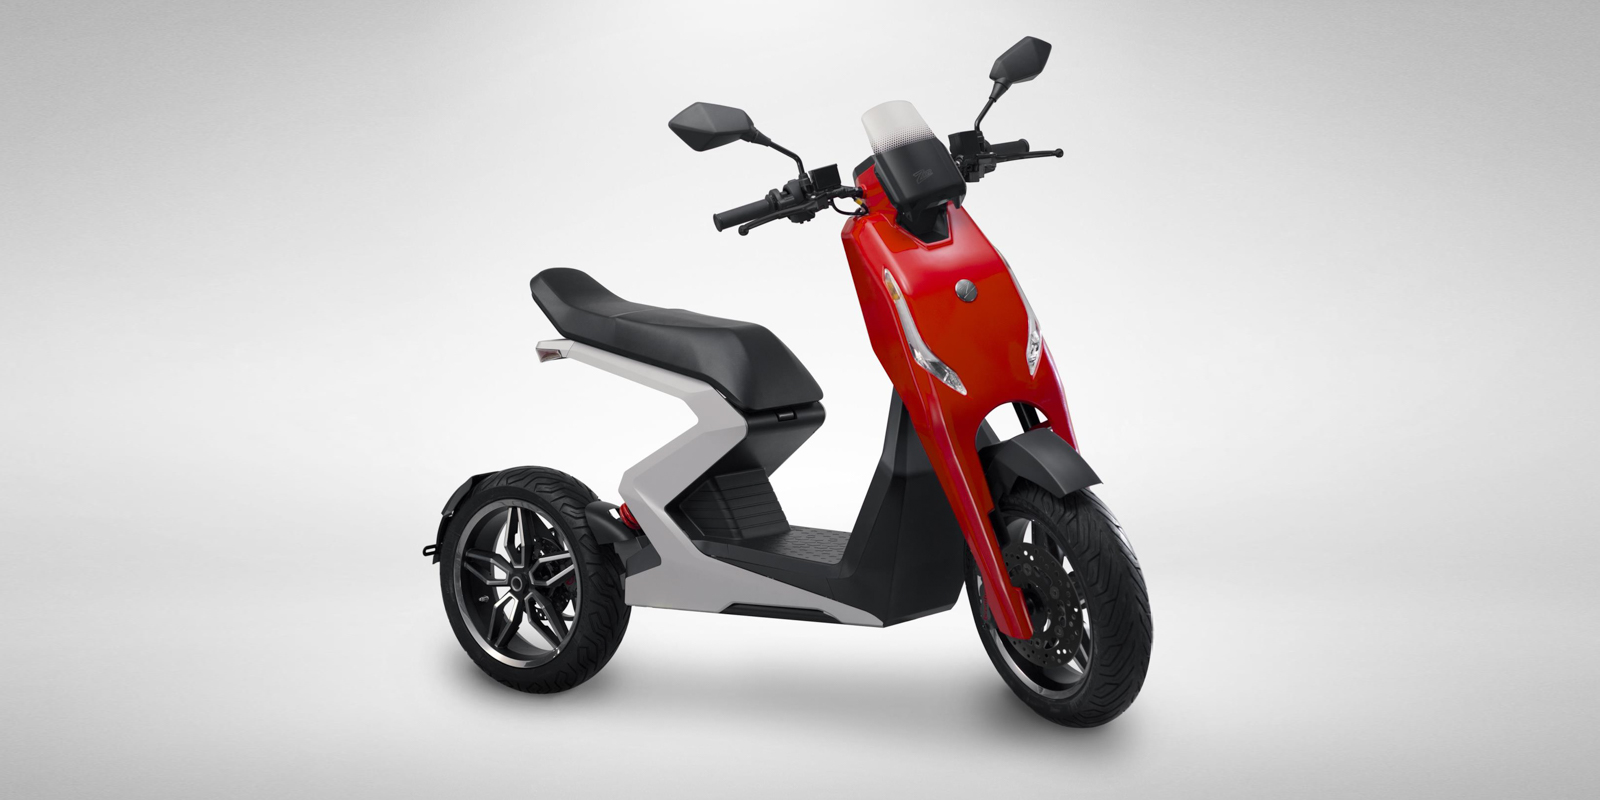 Zapp i300 60 MPH seated electric scooter by end of year